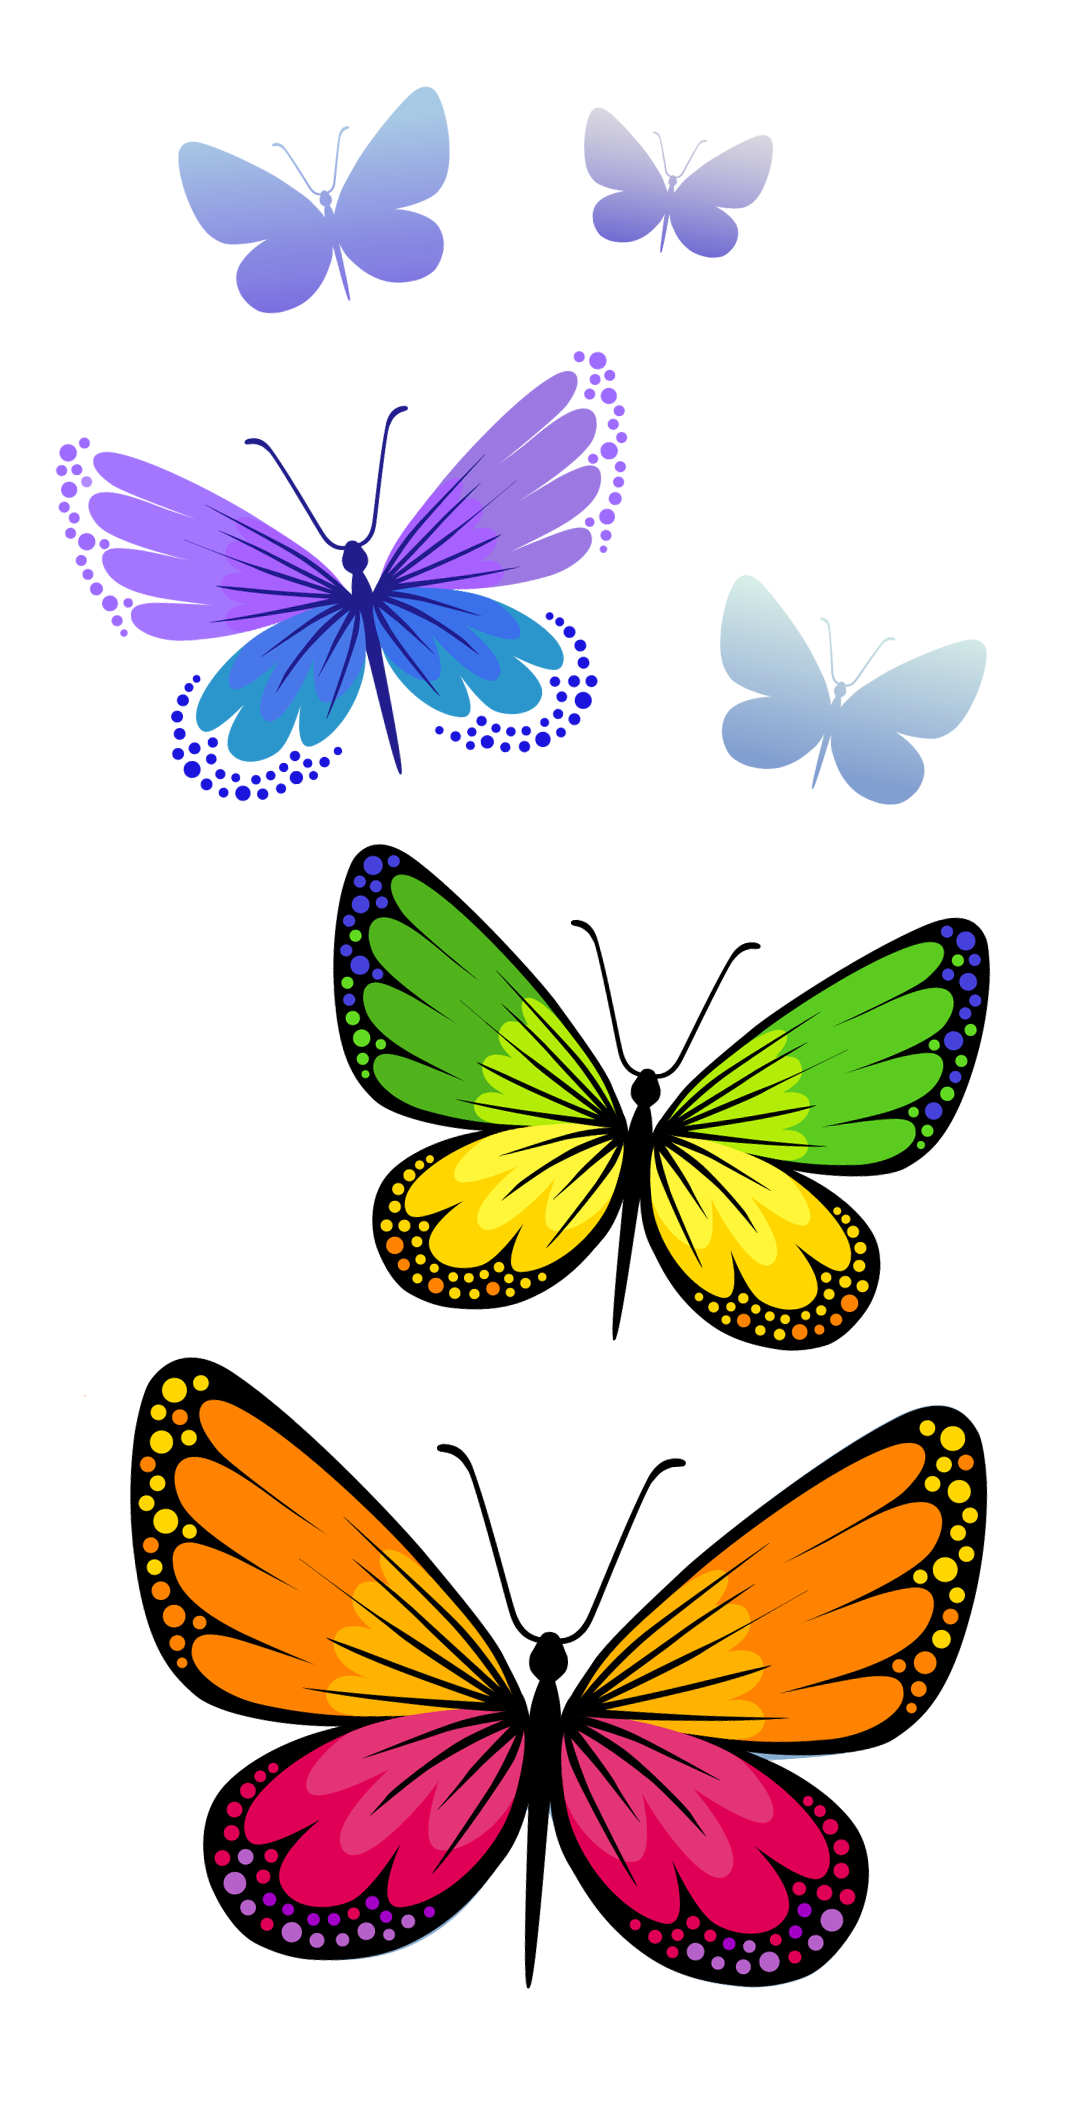 Foot clipart anklet. Butterflies composition png image